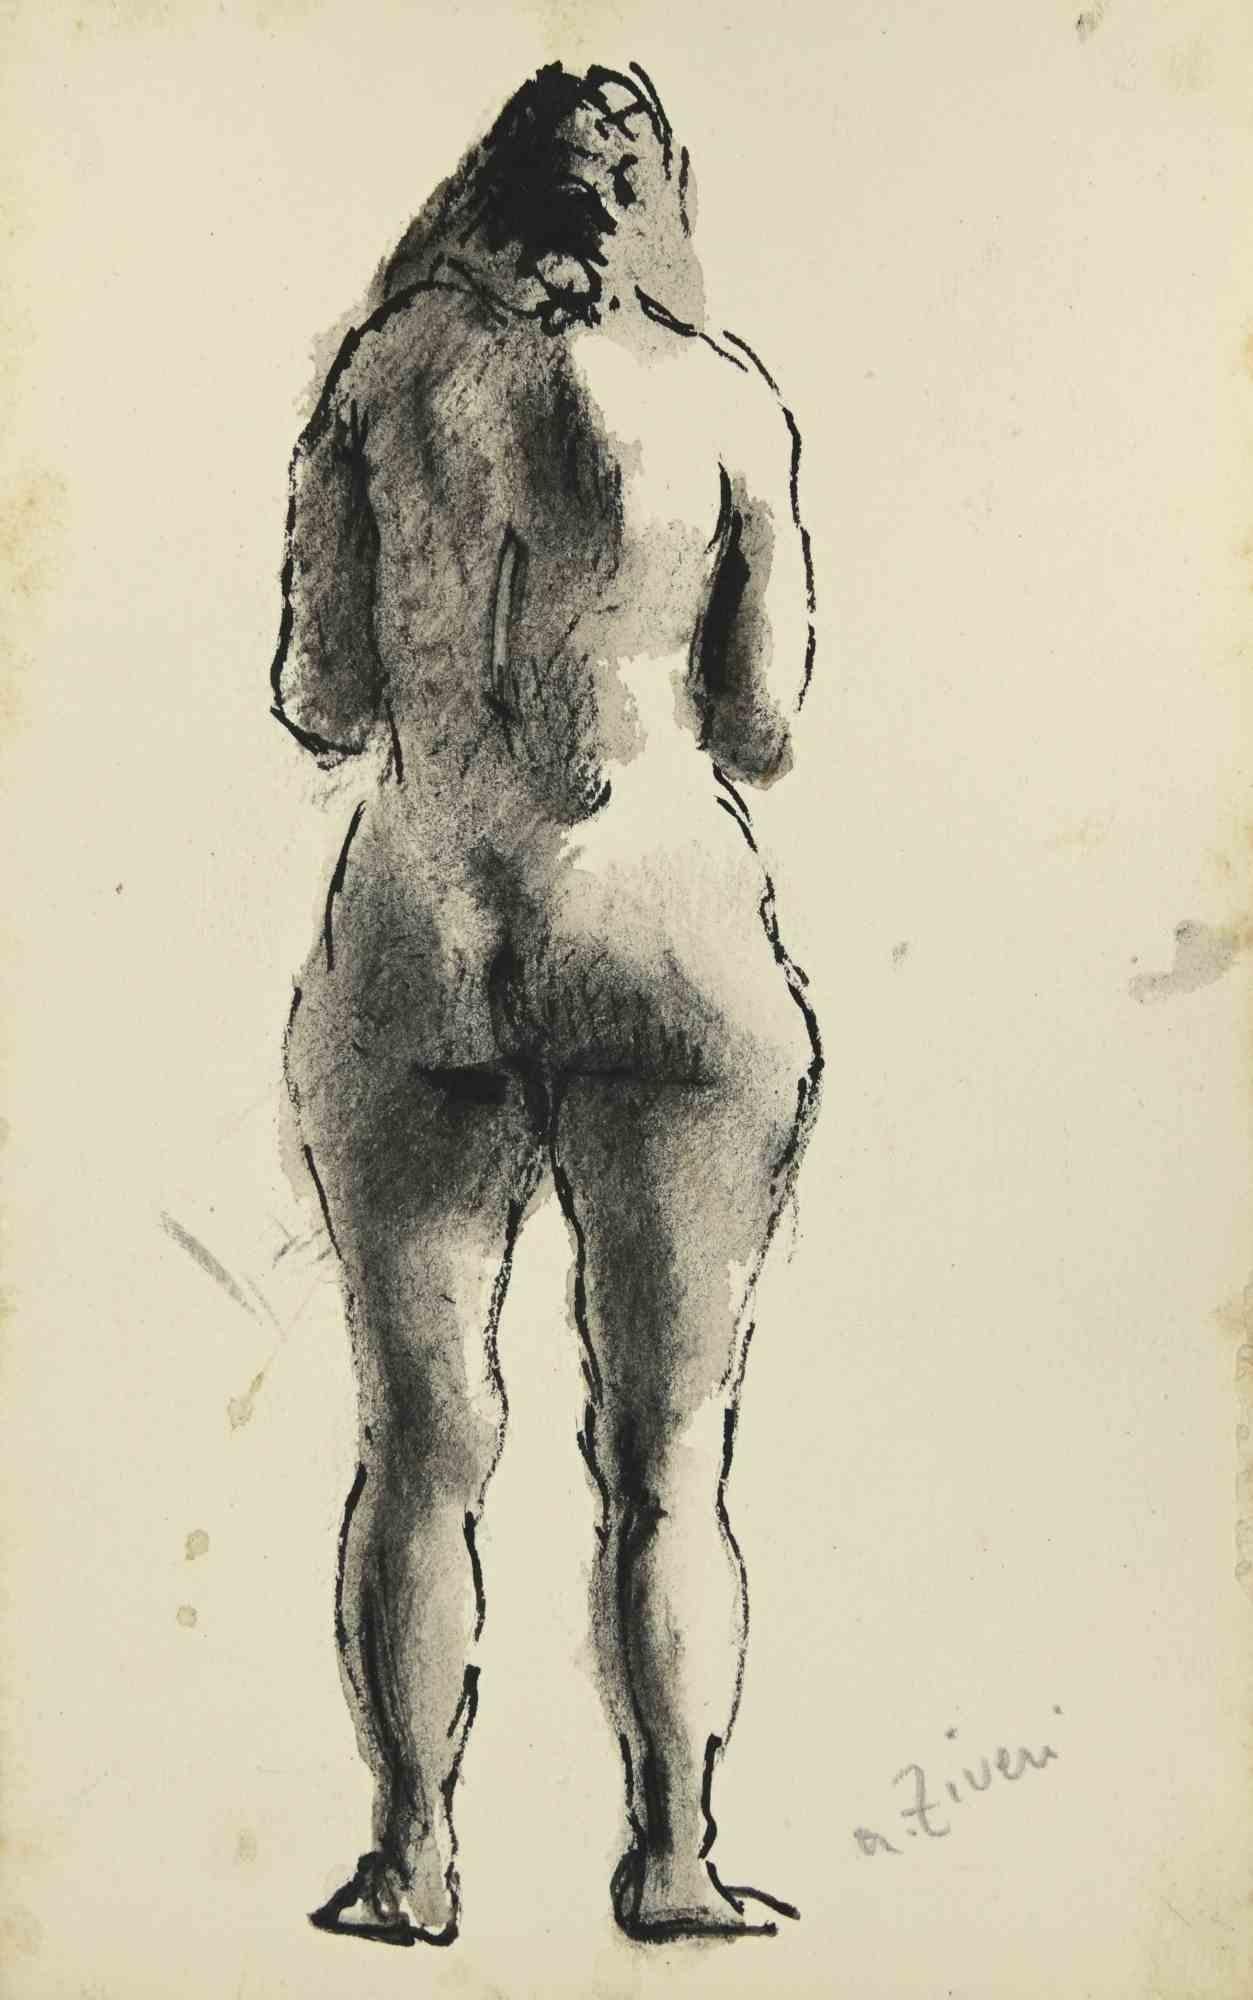 The Nude is a drawing realized by Alberto Ziveri in 1930s

Ink and watercolor on paper.

Hand-signed.

In good condition with slight foxing.

The artwork is represented through deft strokes masterly.

Alberto Ziveri (Rome,1908 – 1990), the Italian